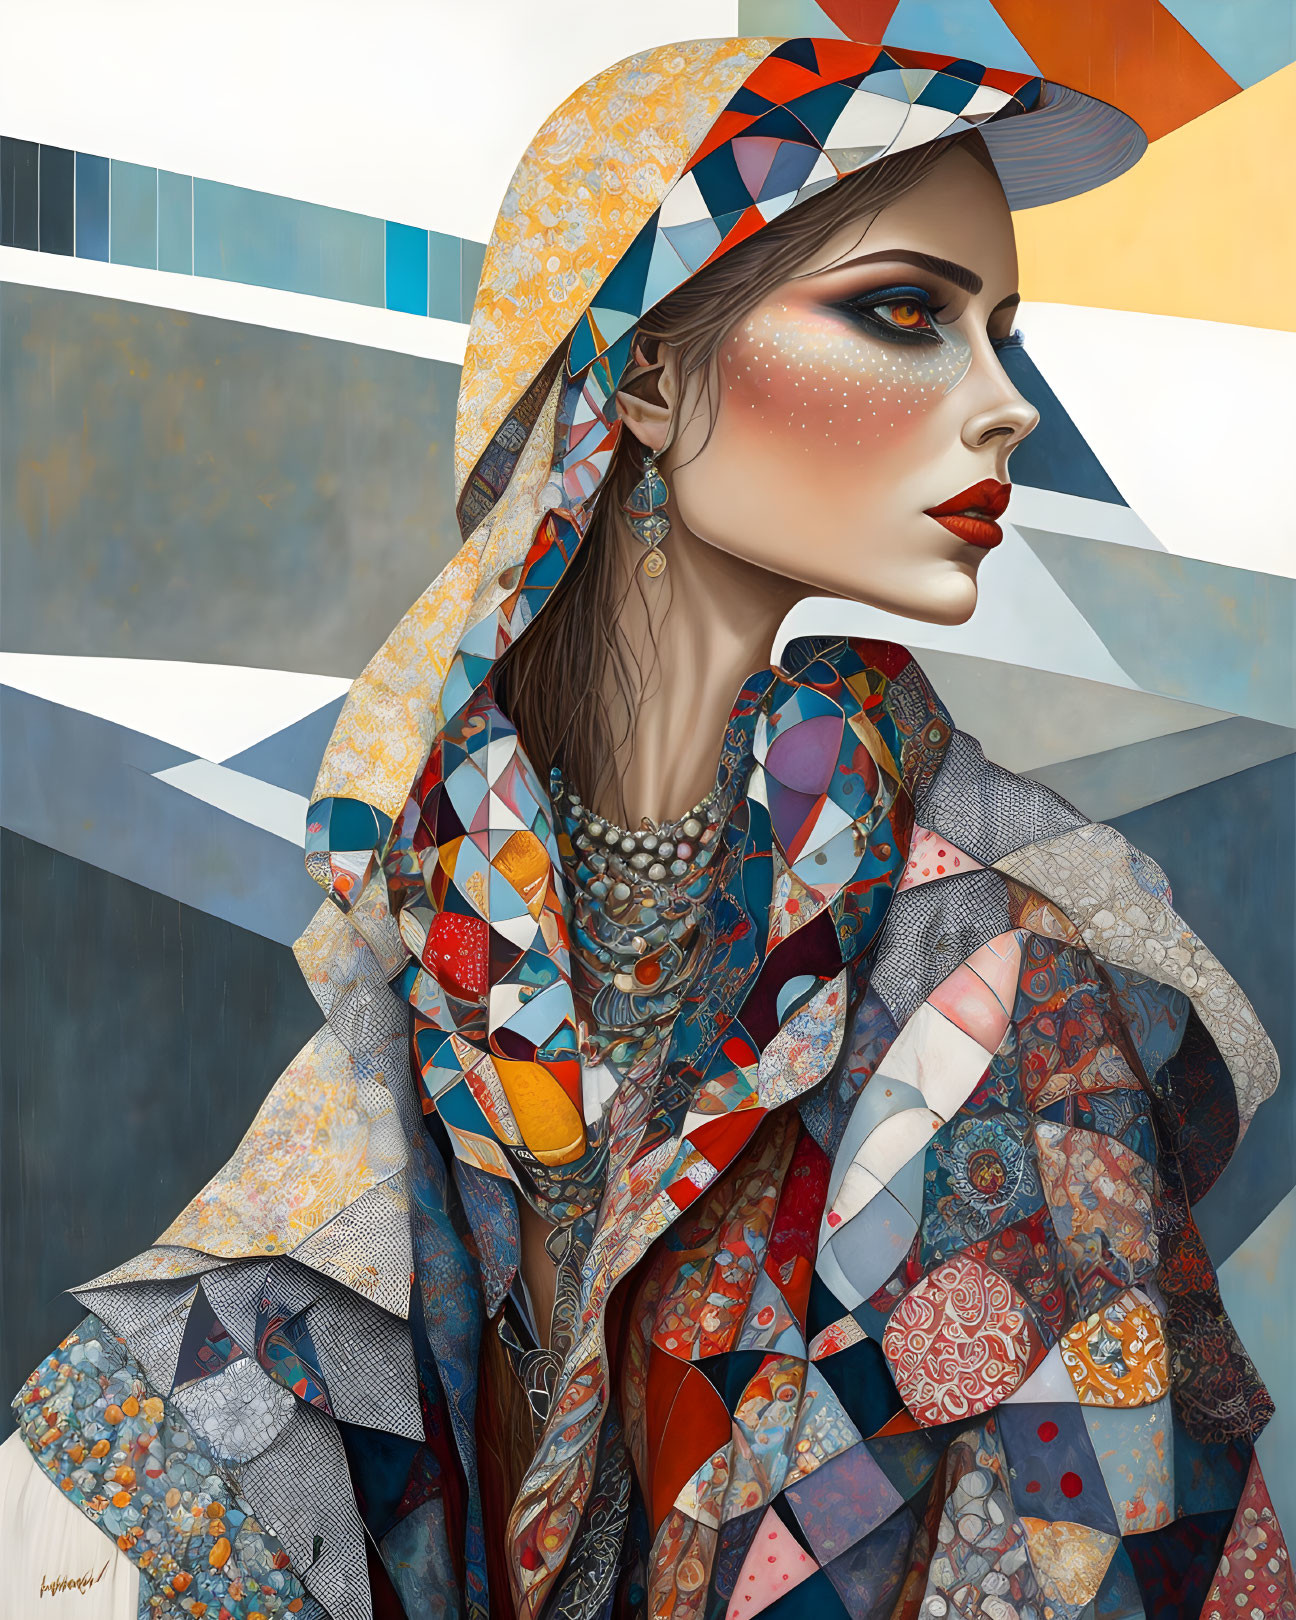 Colorful Geometric Portrait of Woman in Patterned Attire